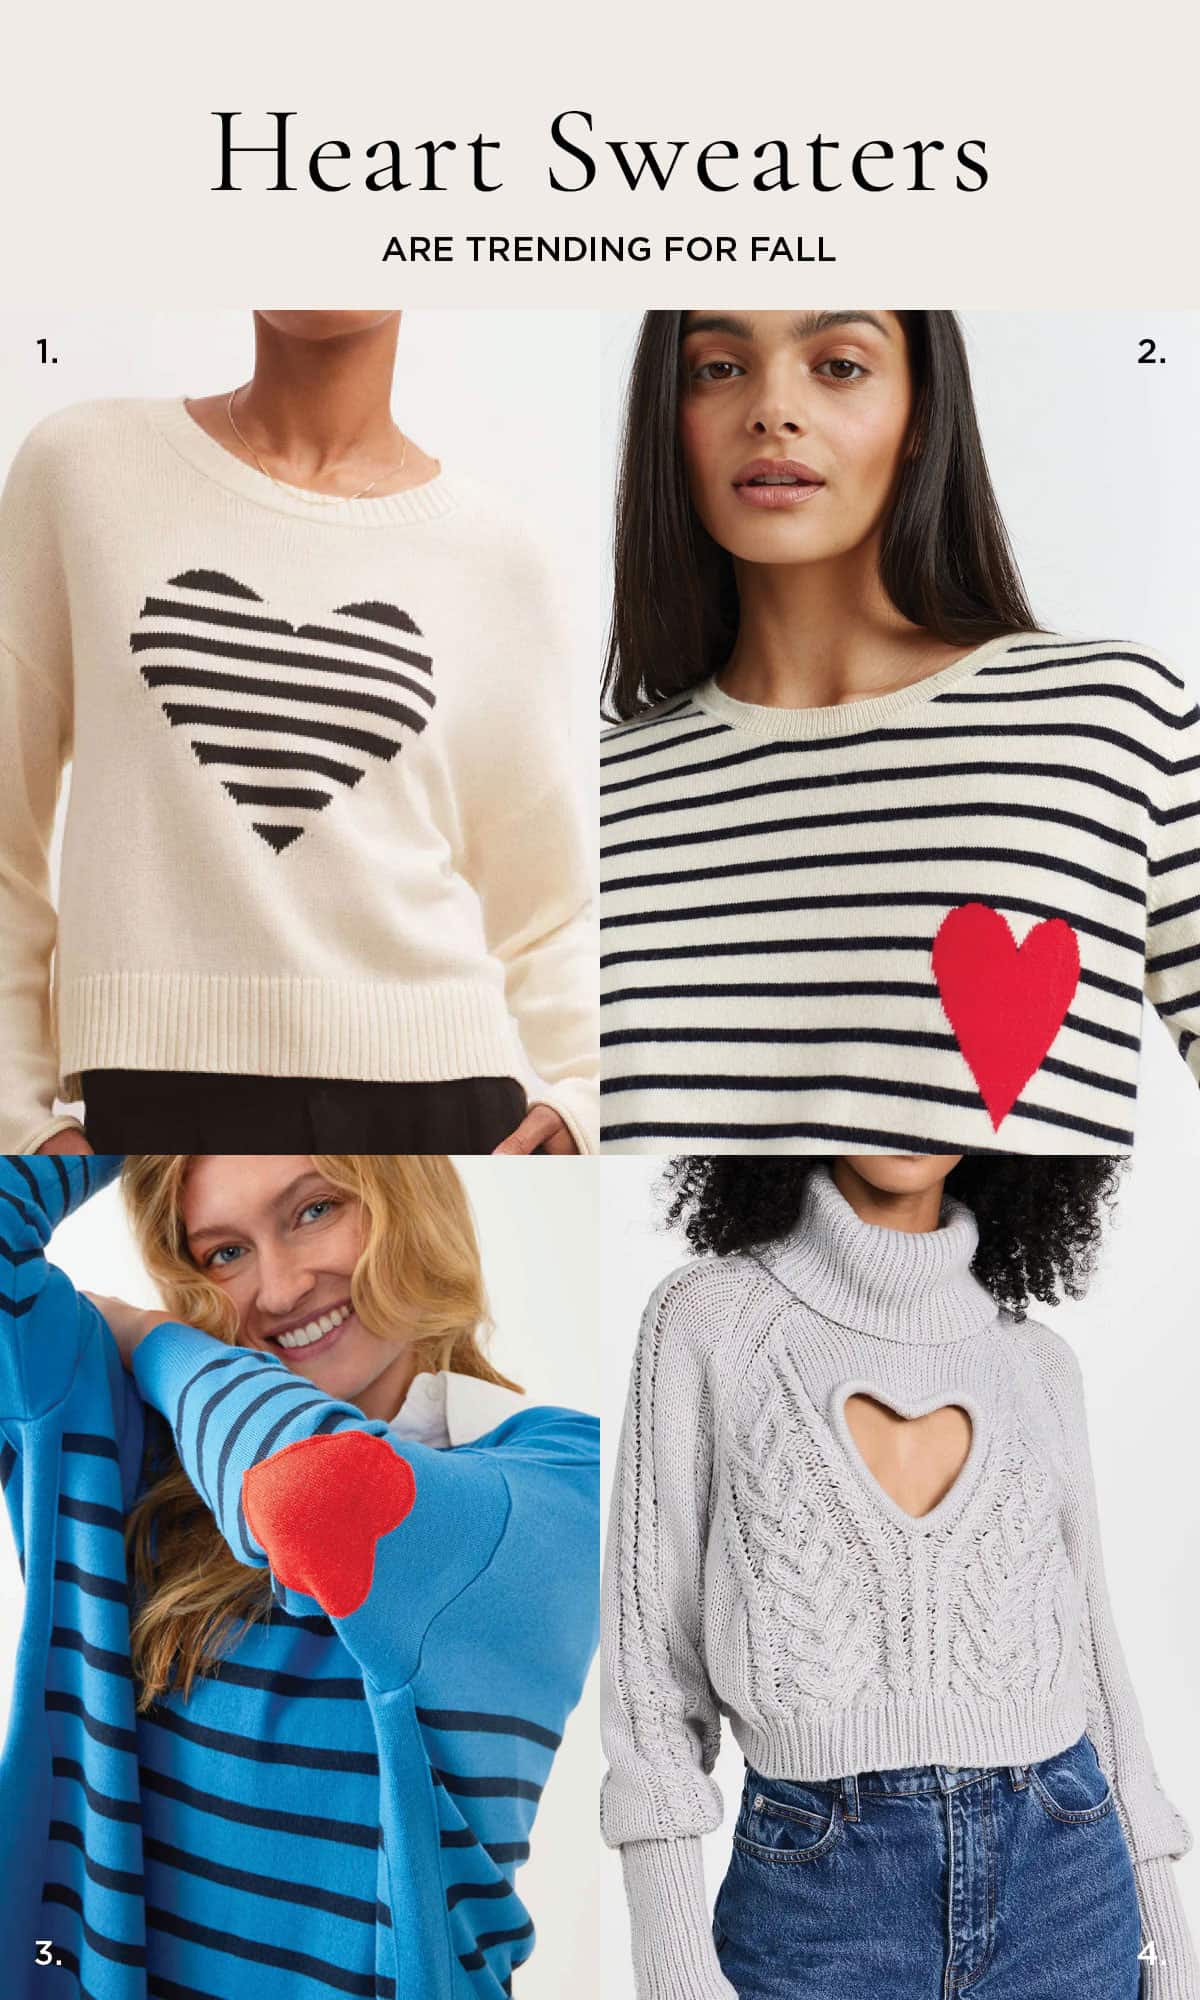 Best Heart Sweaters Trending For Fall 2023 - Striped sweaters with a graphic heart plus a cut-out heart sweater